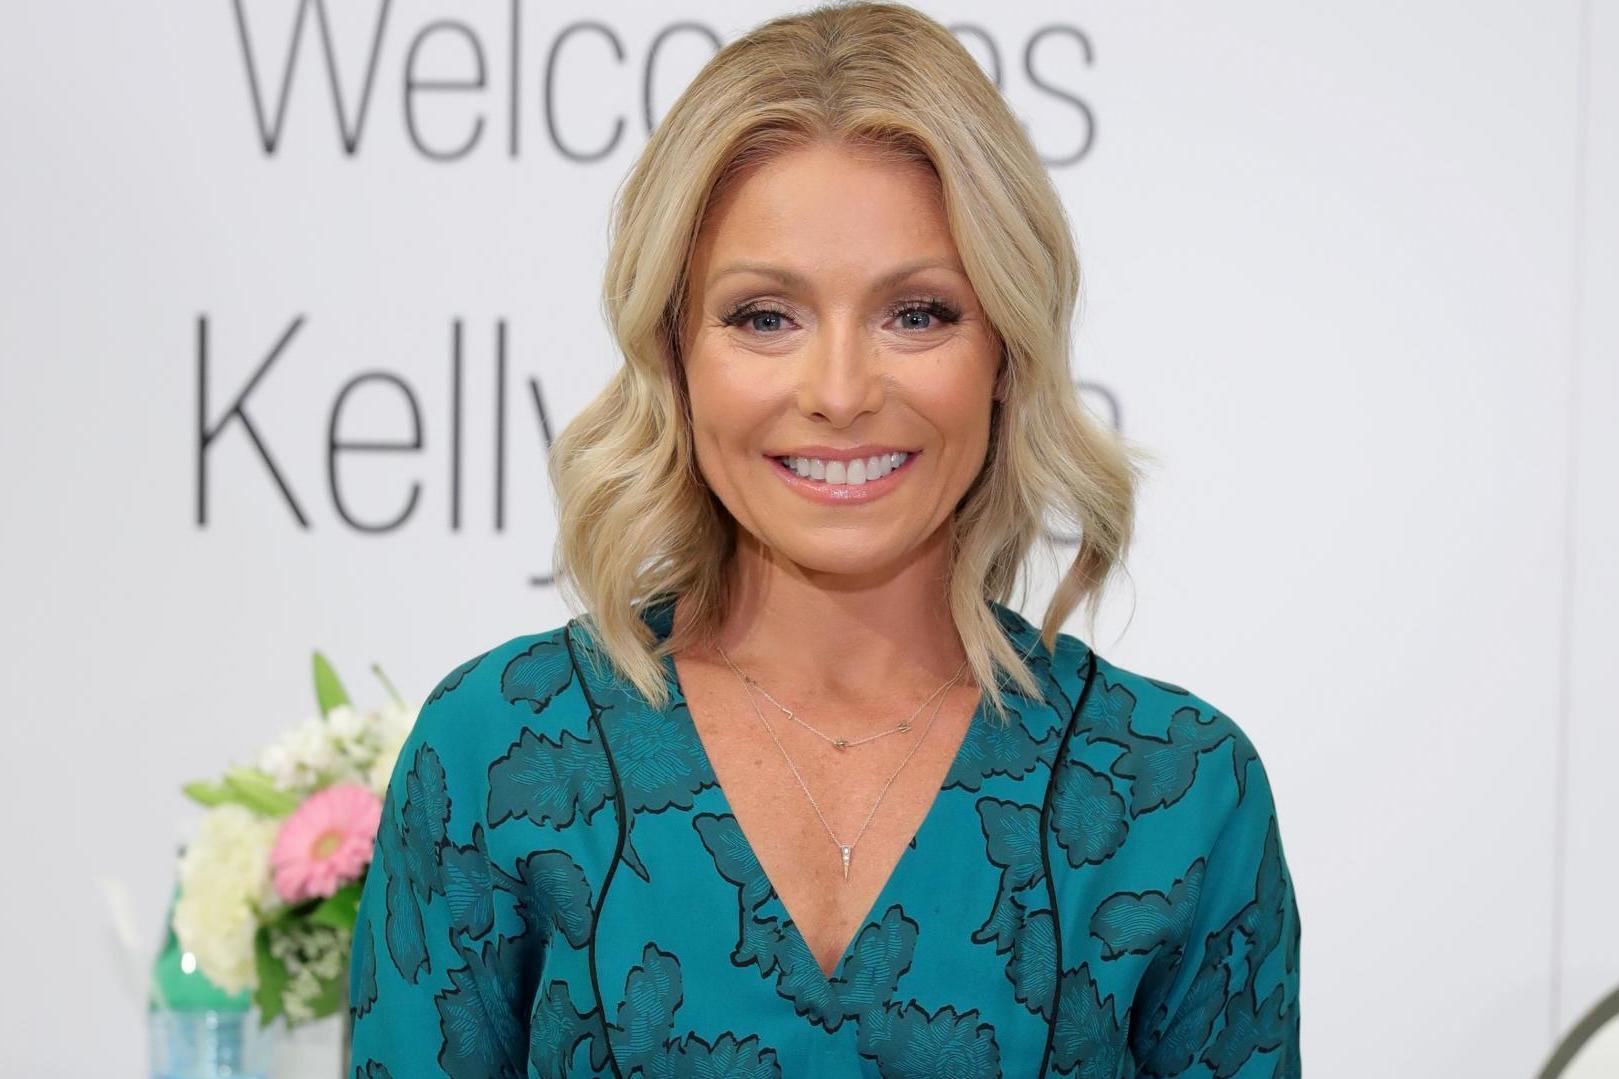 Kelly Ripa responds to backlash over joke about her son experiencing 'extreme poverty'